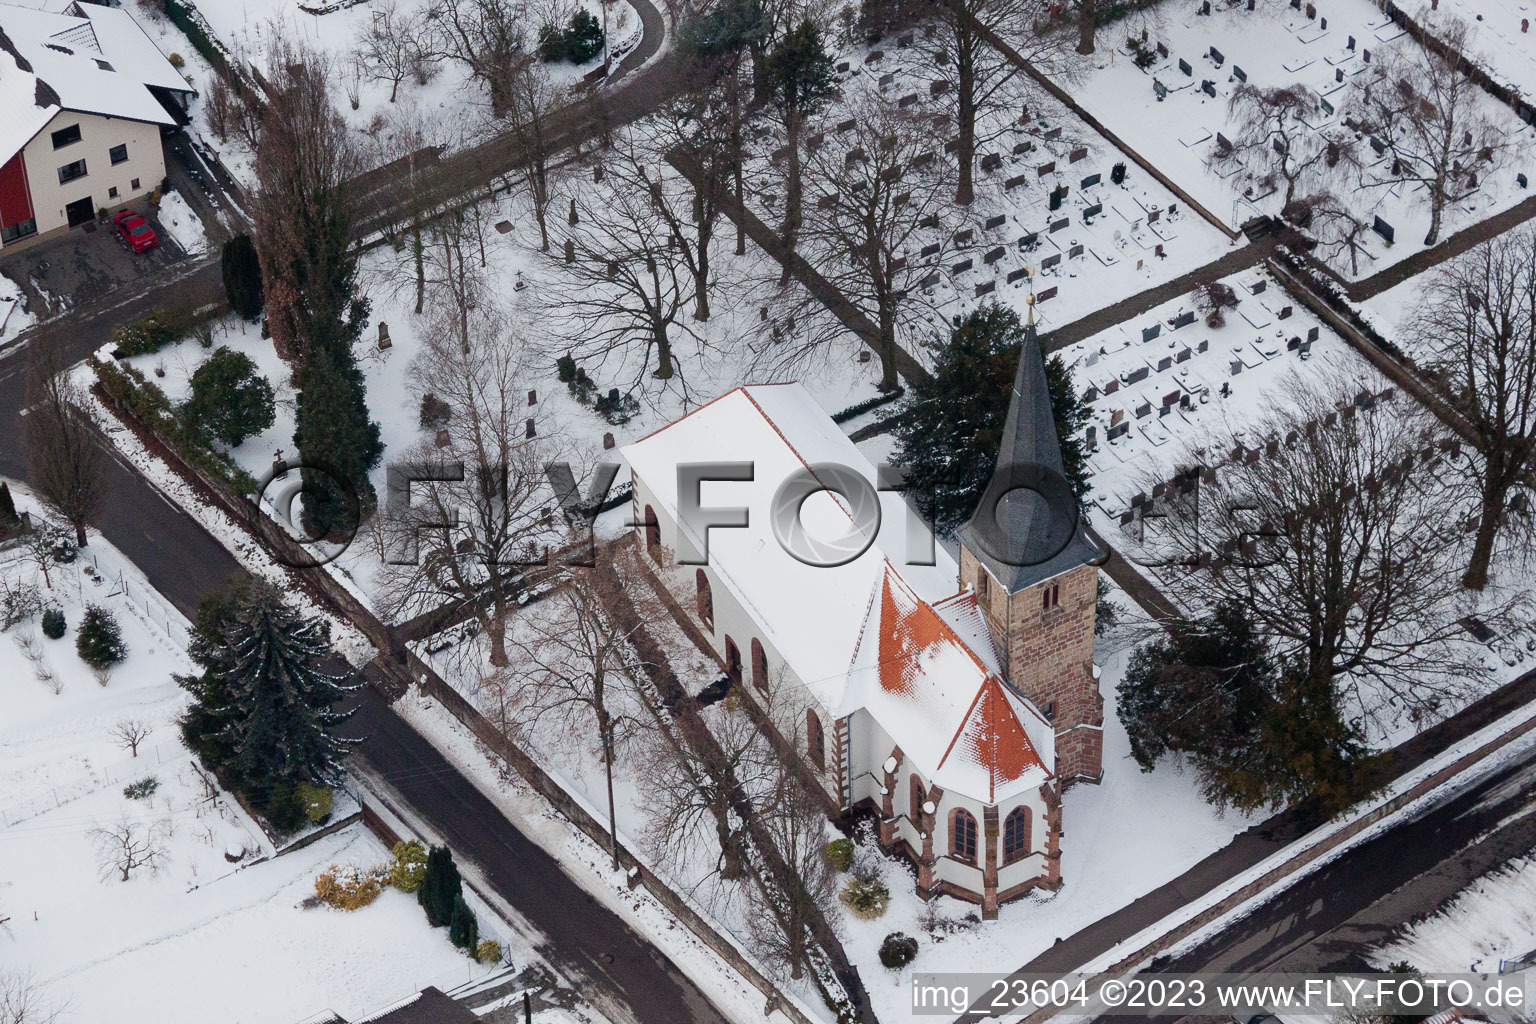 Freckenfeld in the state Rhineland-Palatinate, Germany from above